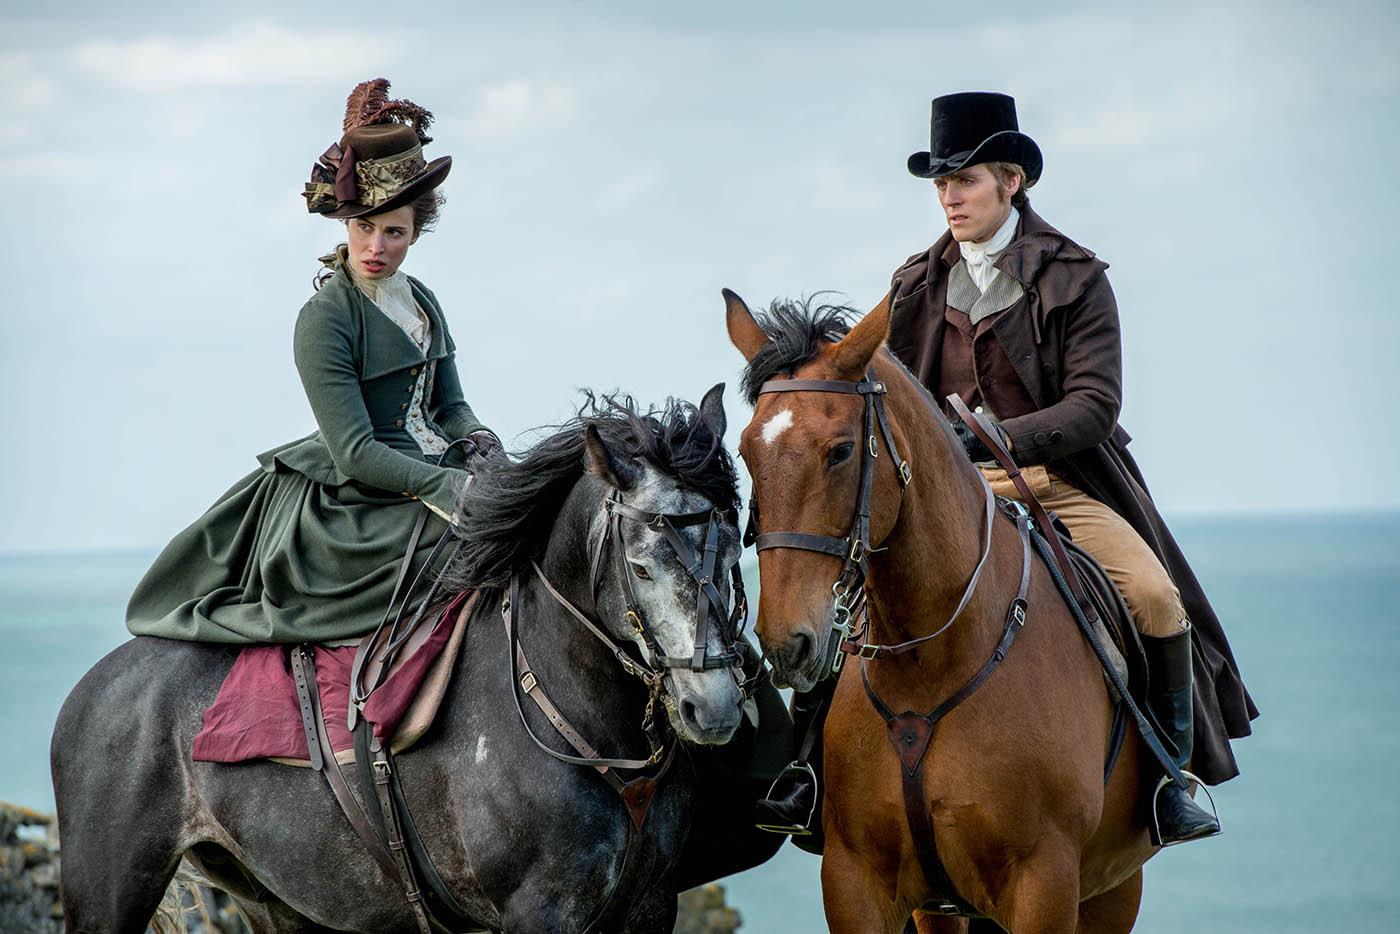 Poldark. Photo: Mammoth Screen for BBC and MASTERPIECE